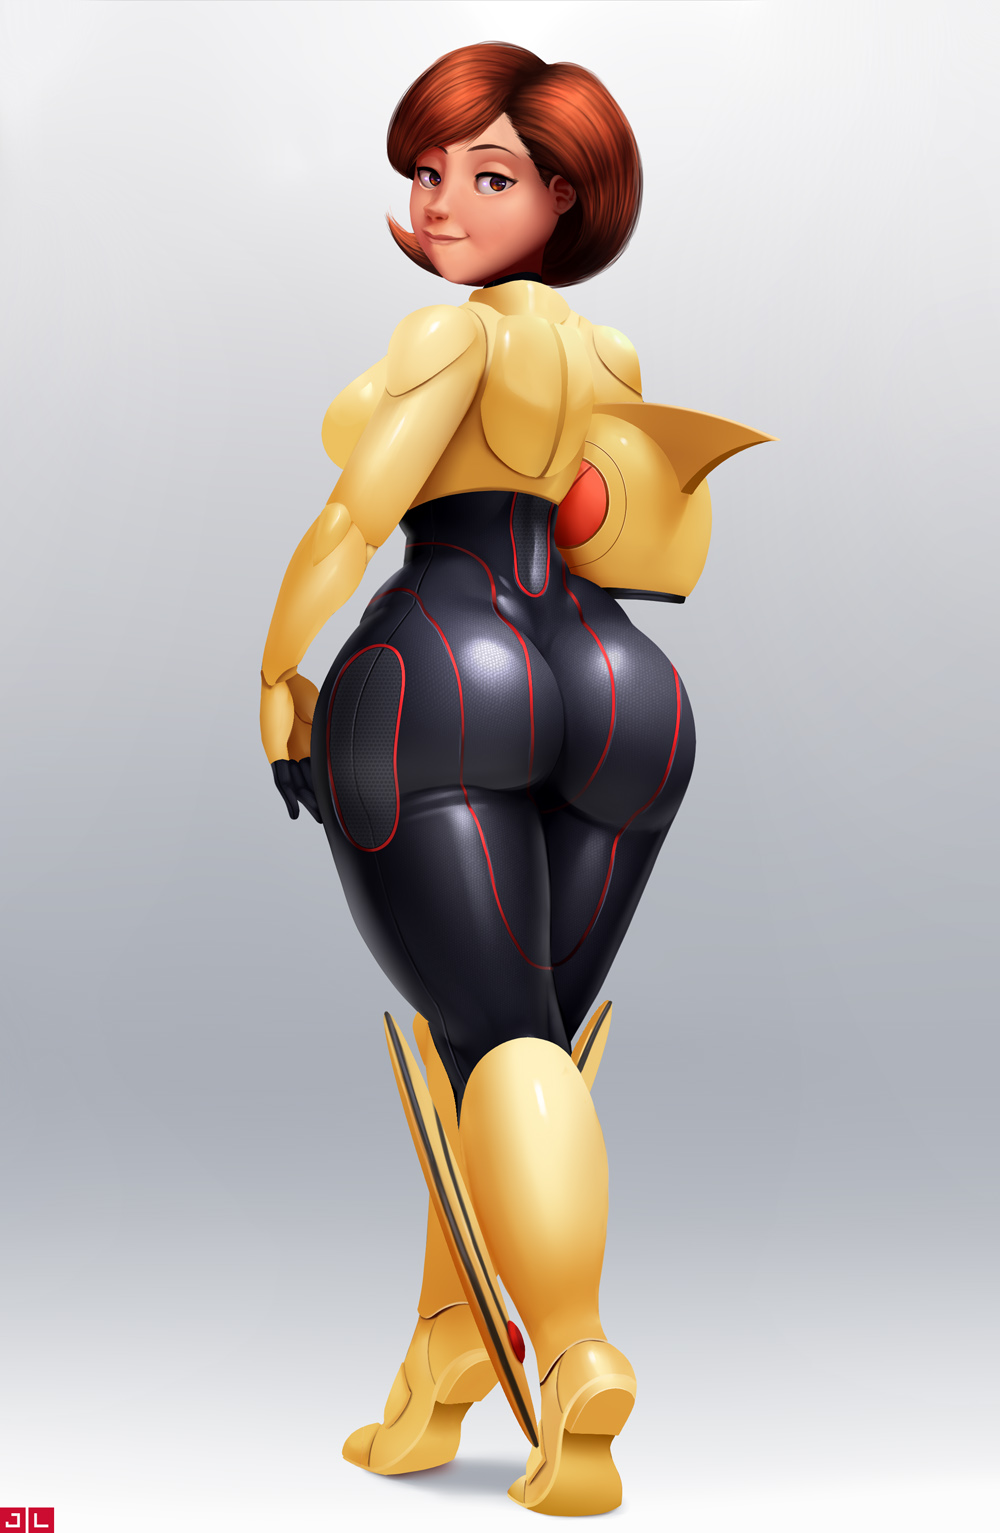 Anime 1000x1533 The Incredibles Elastigirl digital art ass thick ass thick thigh Go Go Tomago Big Hero 6 cosplay crossover